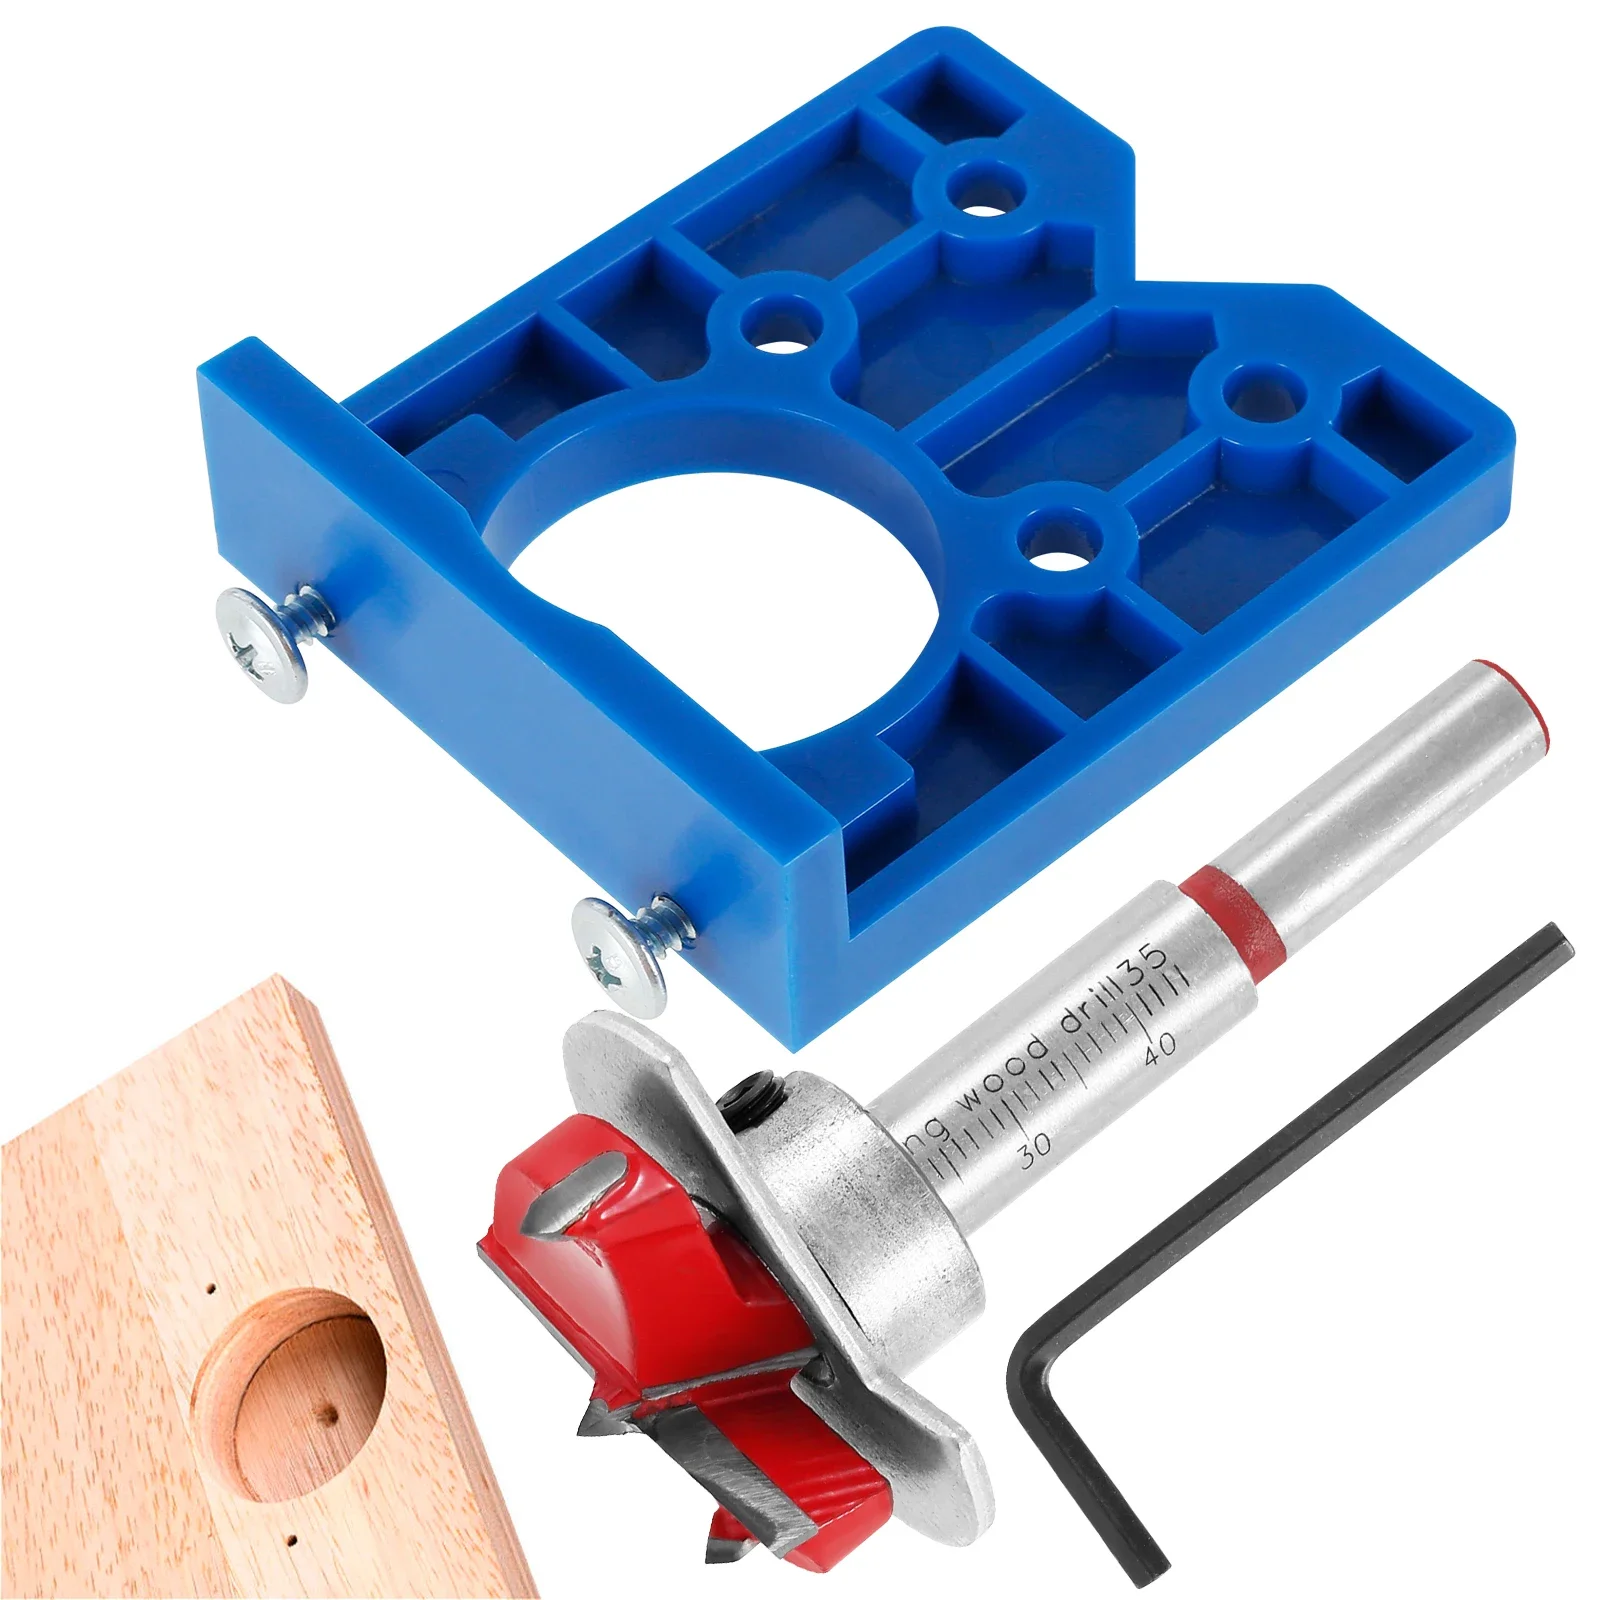 

Concealed Hinge Jig Precision 35mm Hinge Drilling Guide Woodworking Hinge Hole Punching Locator w/ Hex wrench and Adjustable Bit